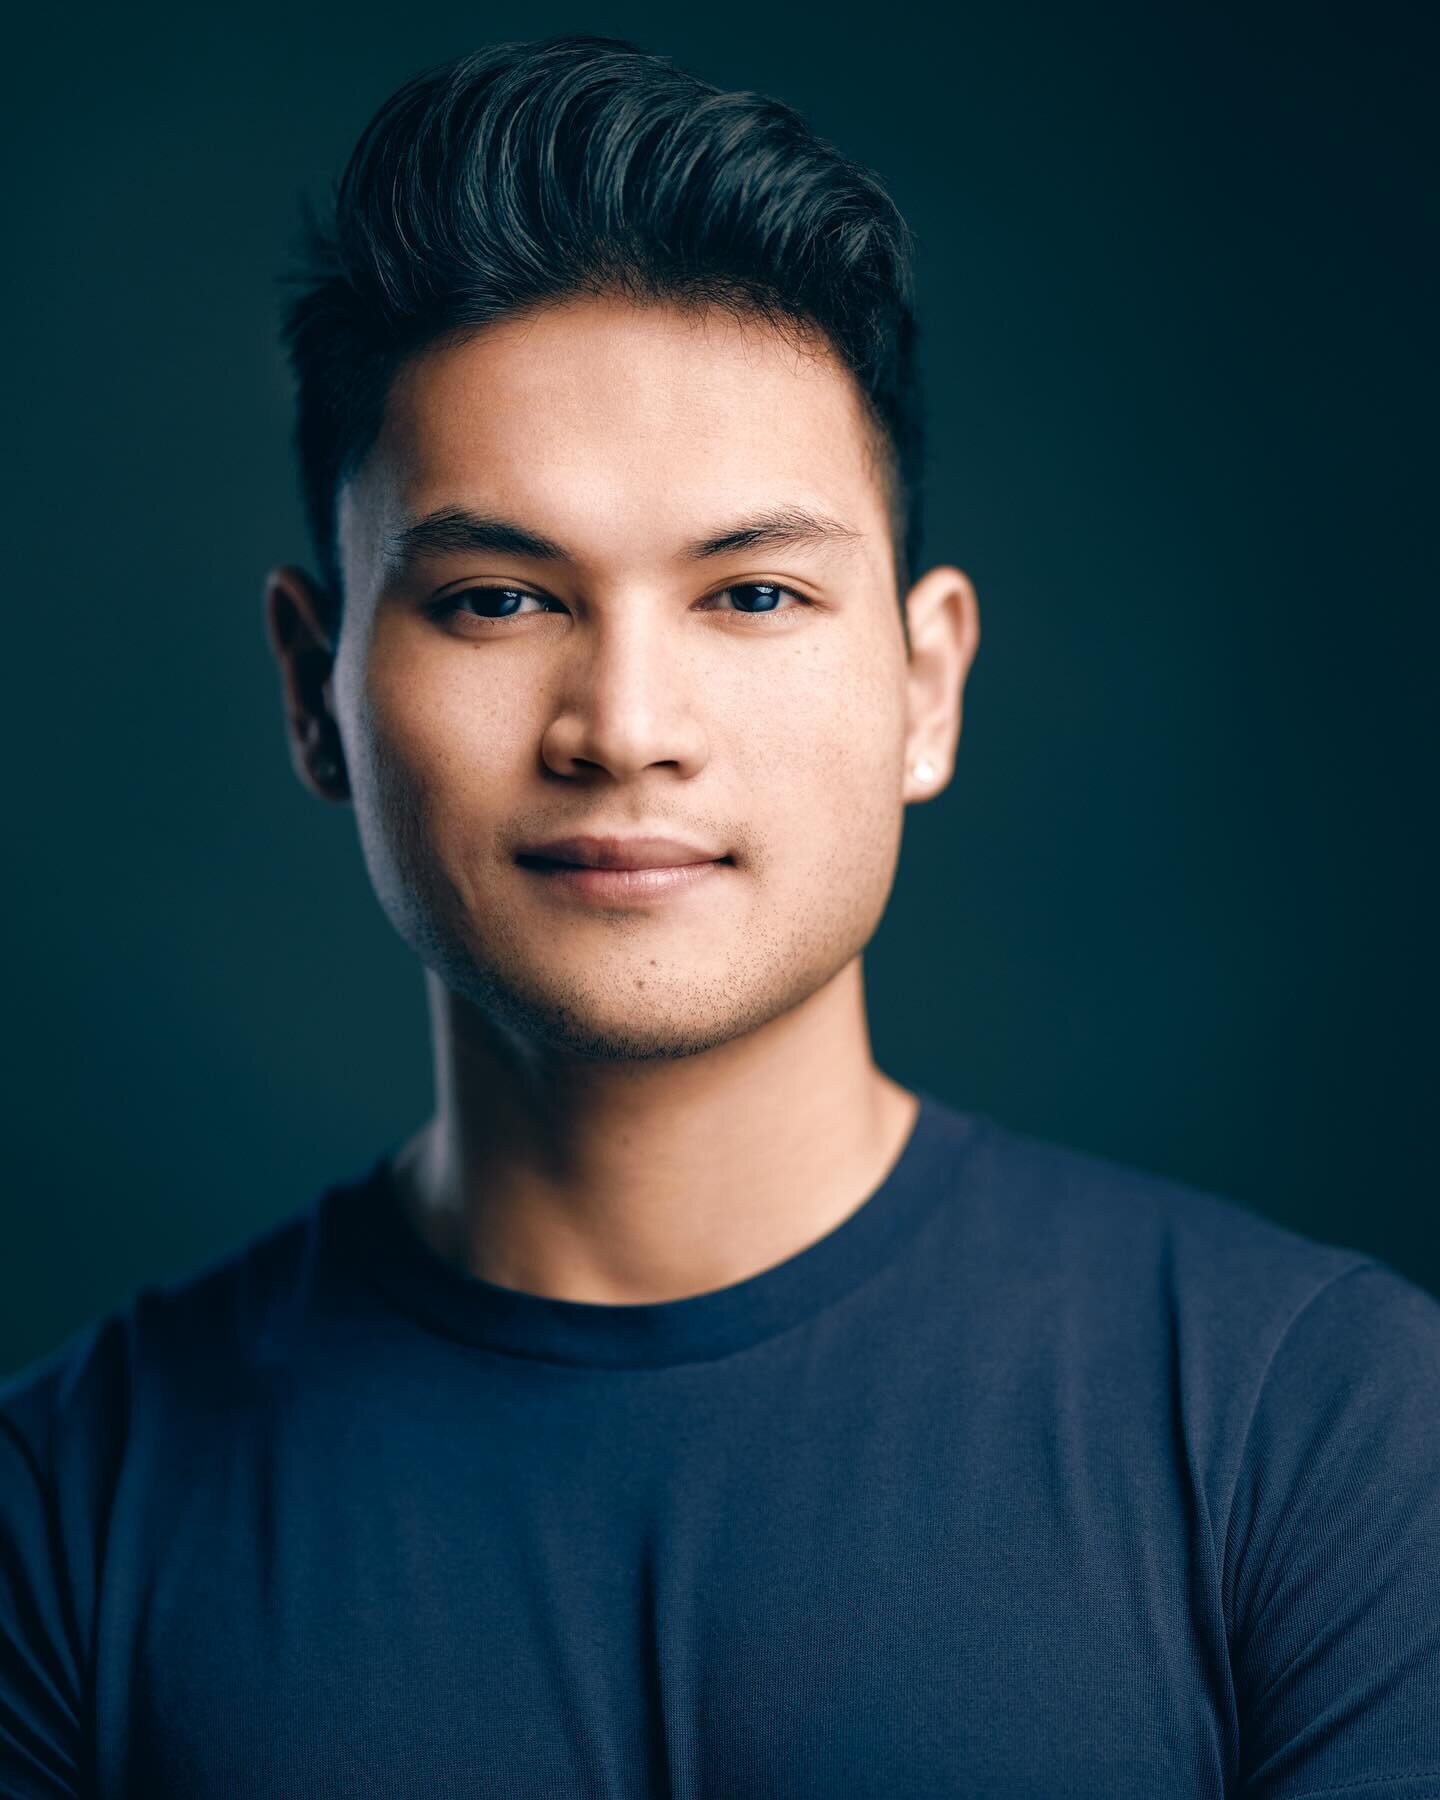 &ldquo;Hey! I&rsquo;m Steven Huynh, I&rsquo;m 5&rsquo; 9&rdquo;, and I&rsquo;m based out of and currently located in New York City.&rdquo;

New headshots captured by Stephen K. Mack (@gnomistphoto). Thank you for helping this awkward dude feel confid